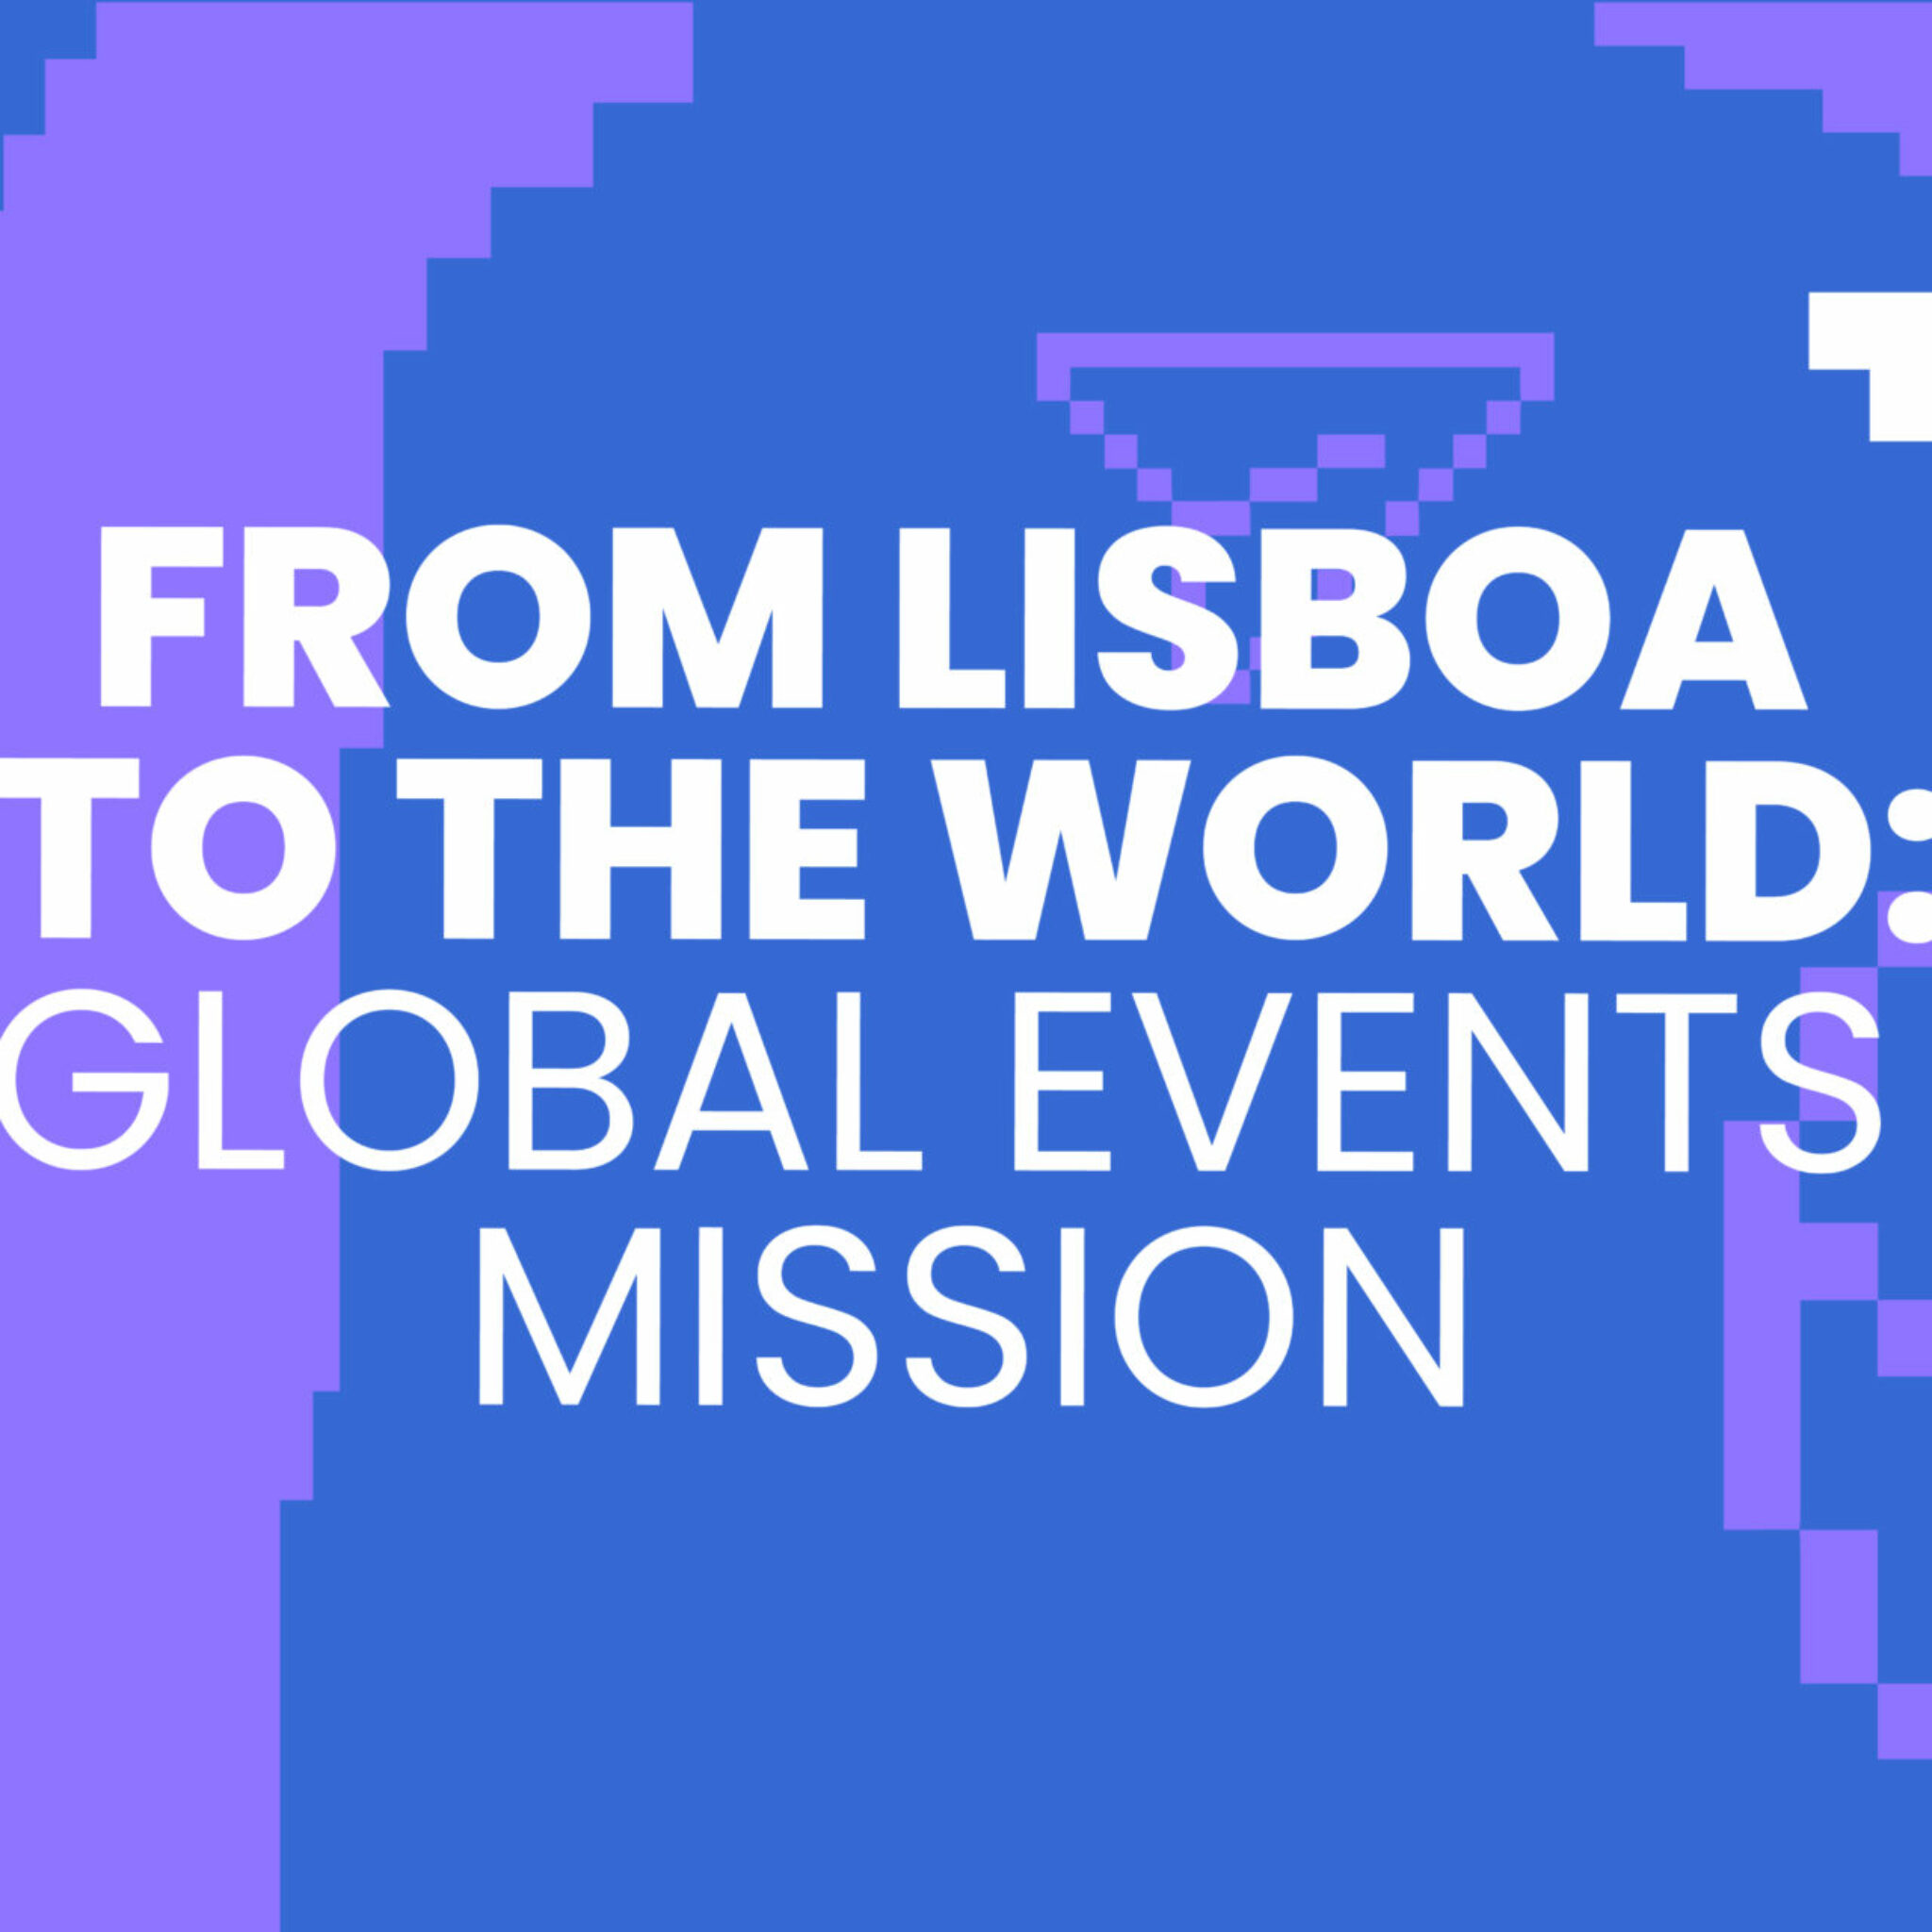 The 12th Lisboa Entrepreneurship Week – Unicorn Week is coming up from May 15 to 21!